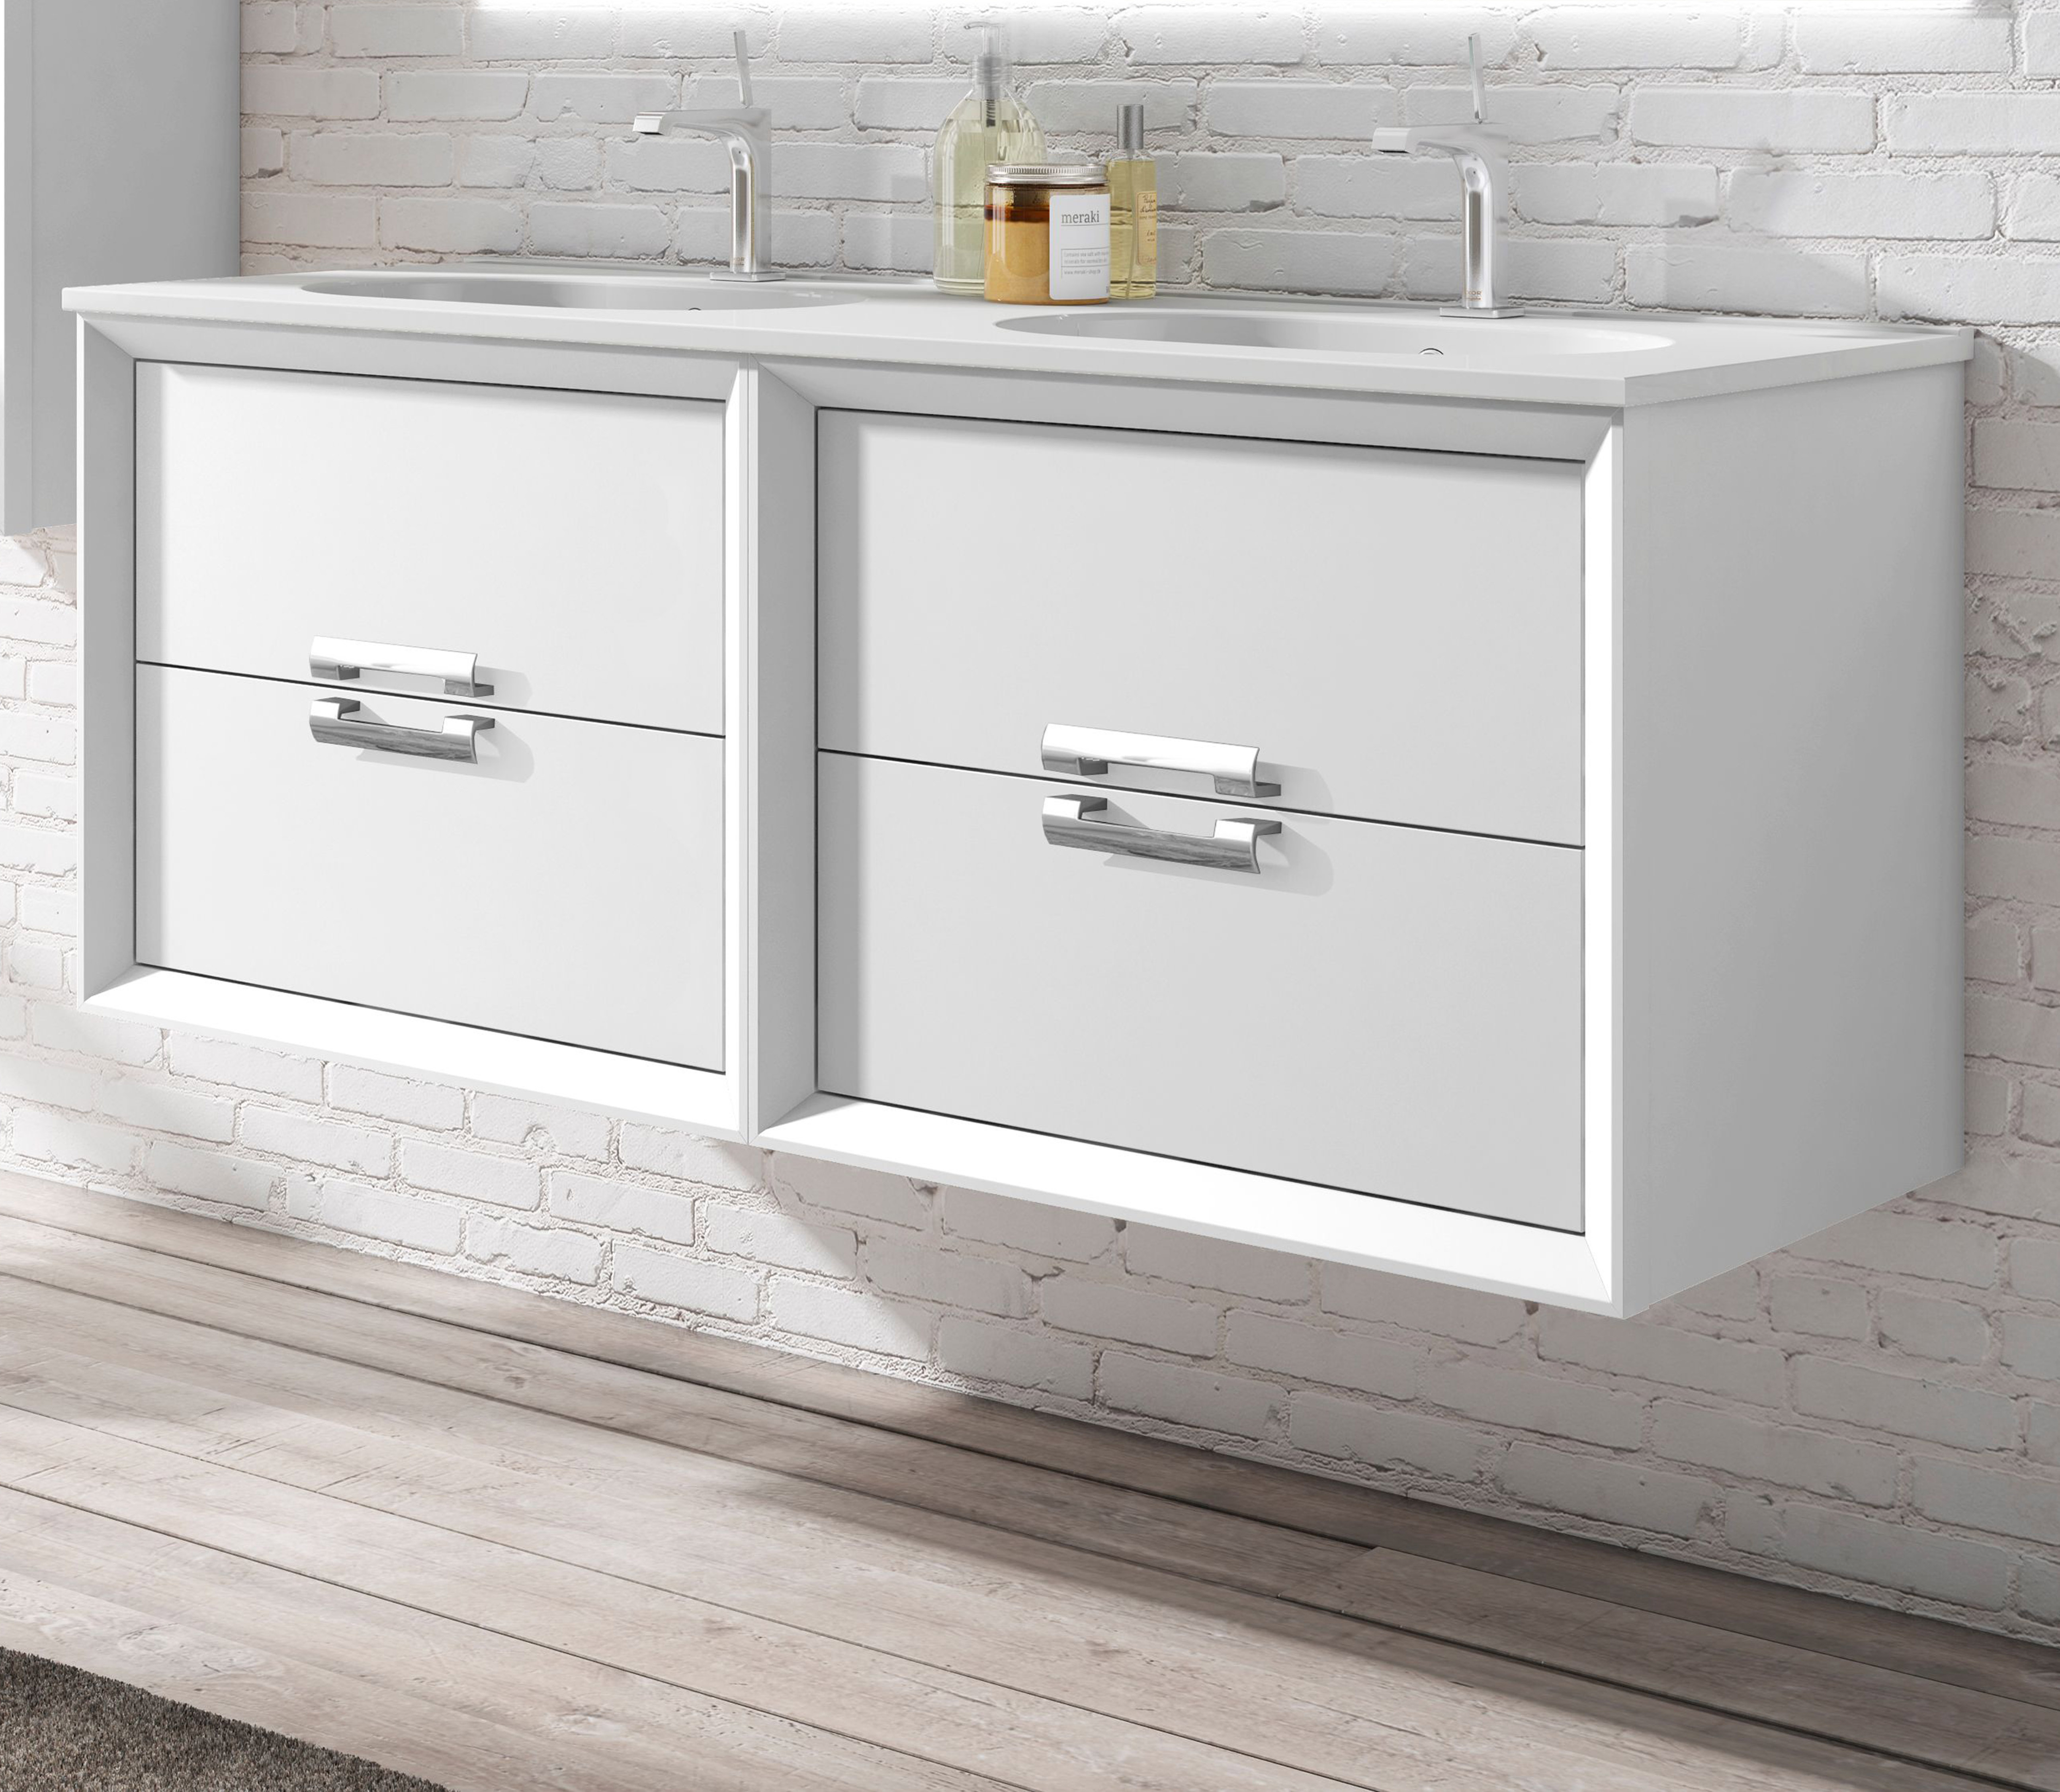 48" Double Sink Vanity 4 Drawer Ceramic Sink with 4 Color Options